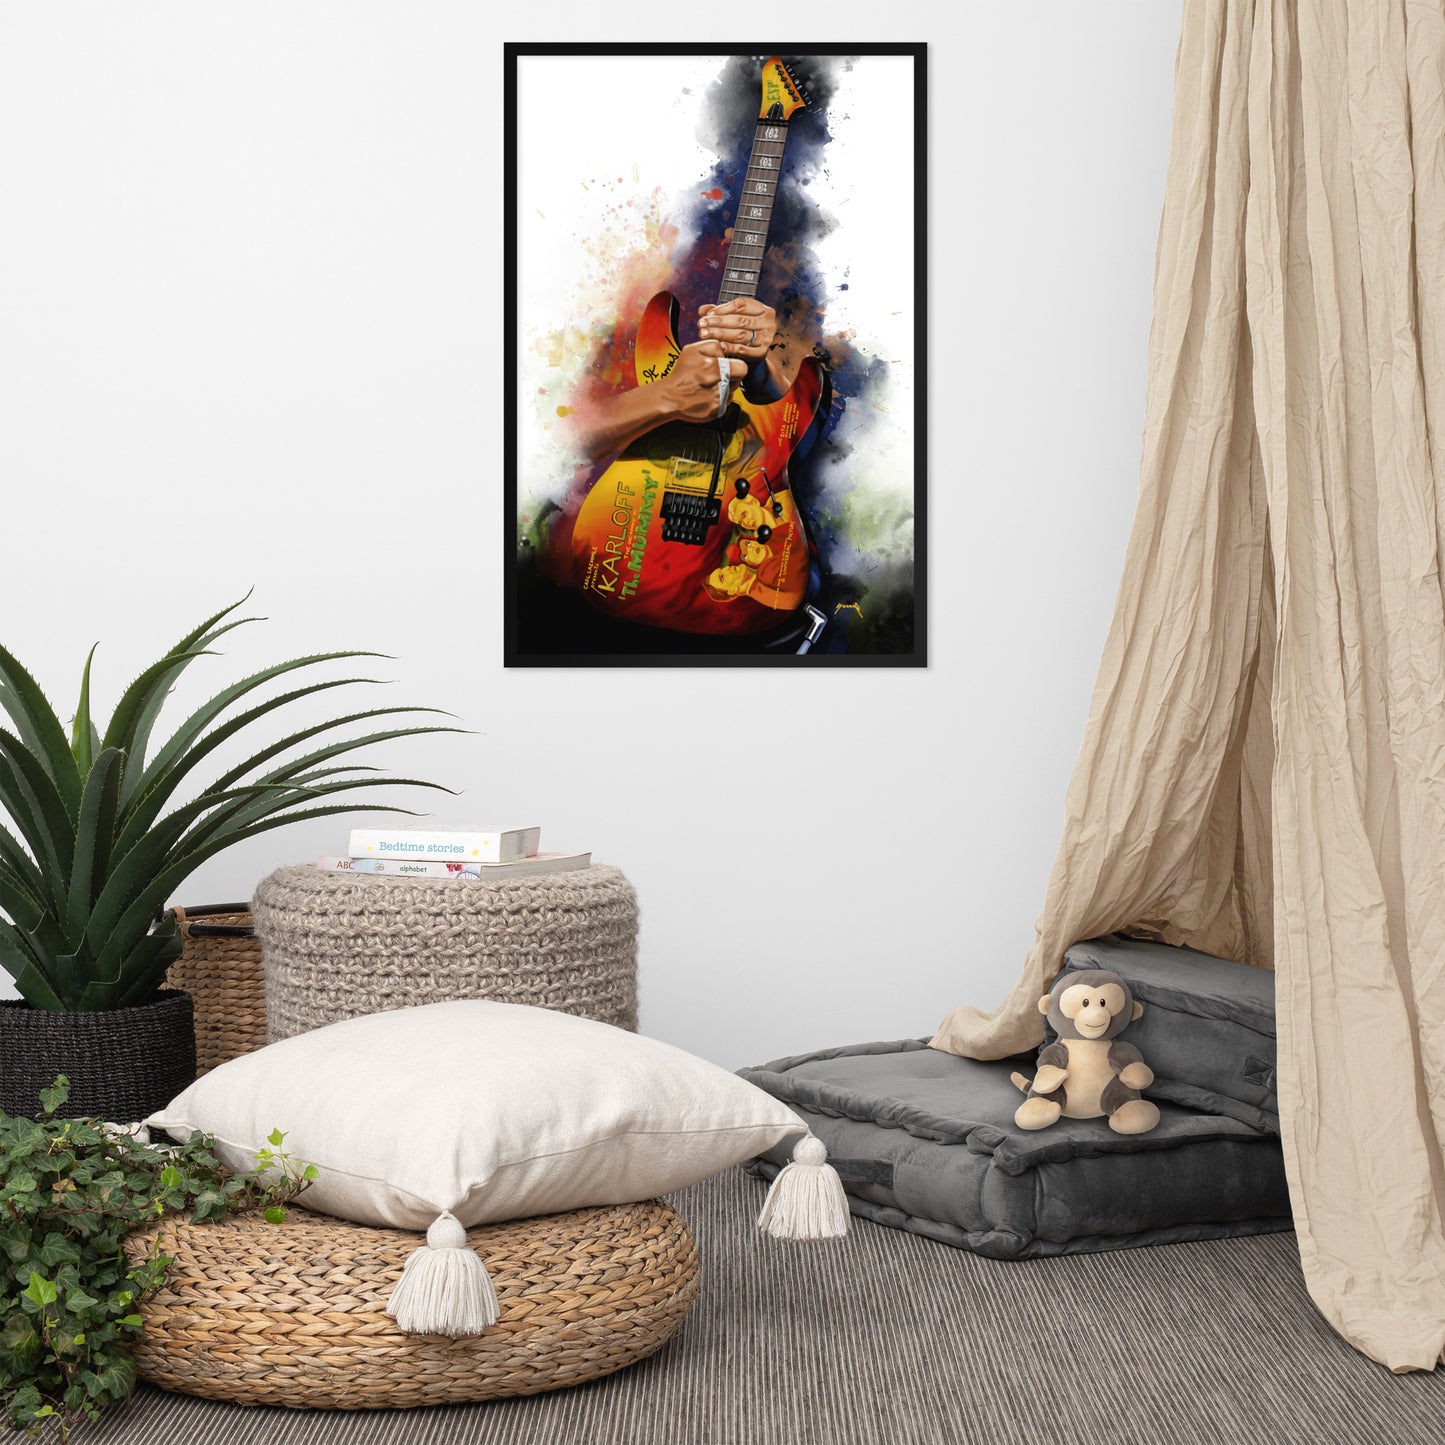 Digital painting of Horror electric guitar printed on canvas